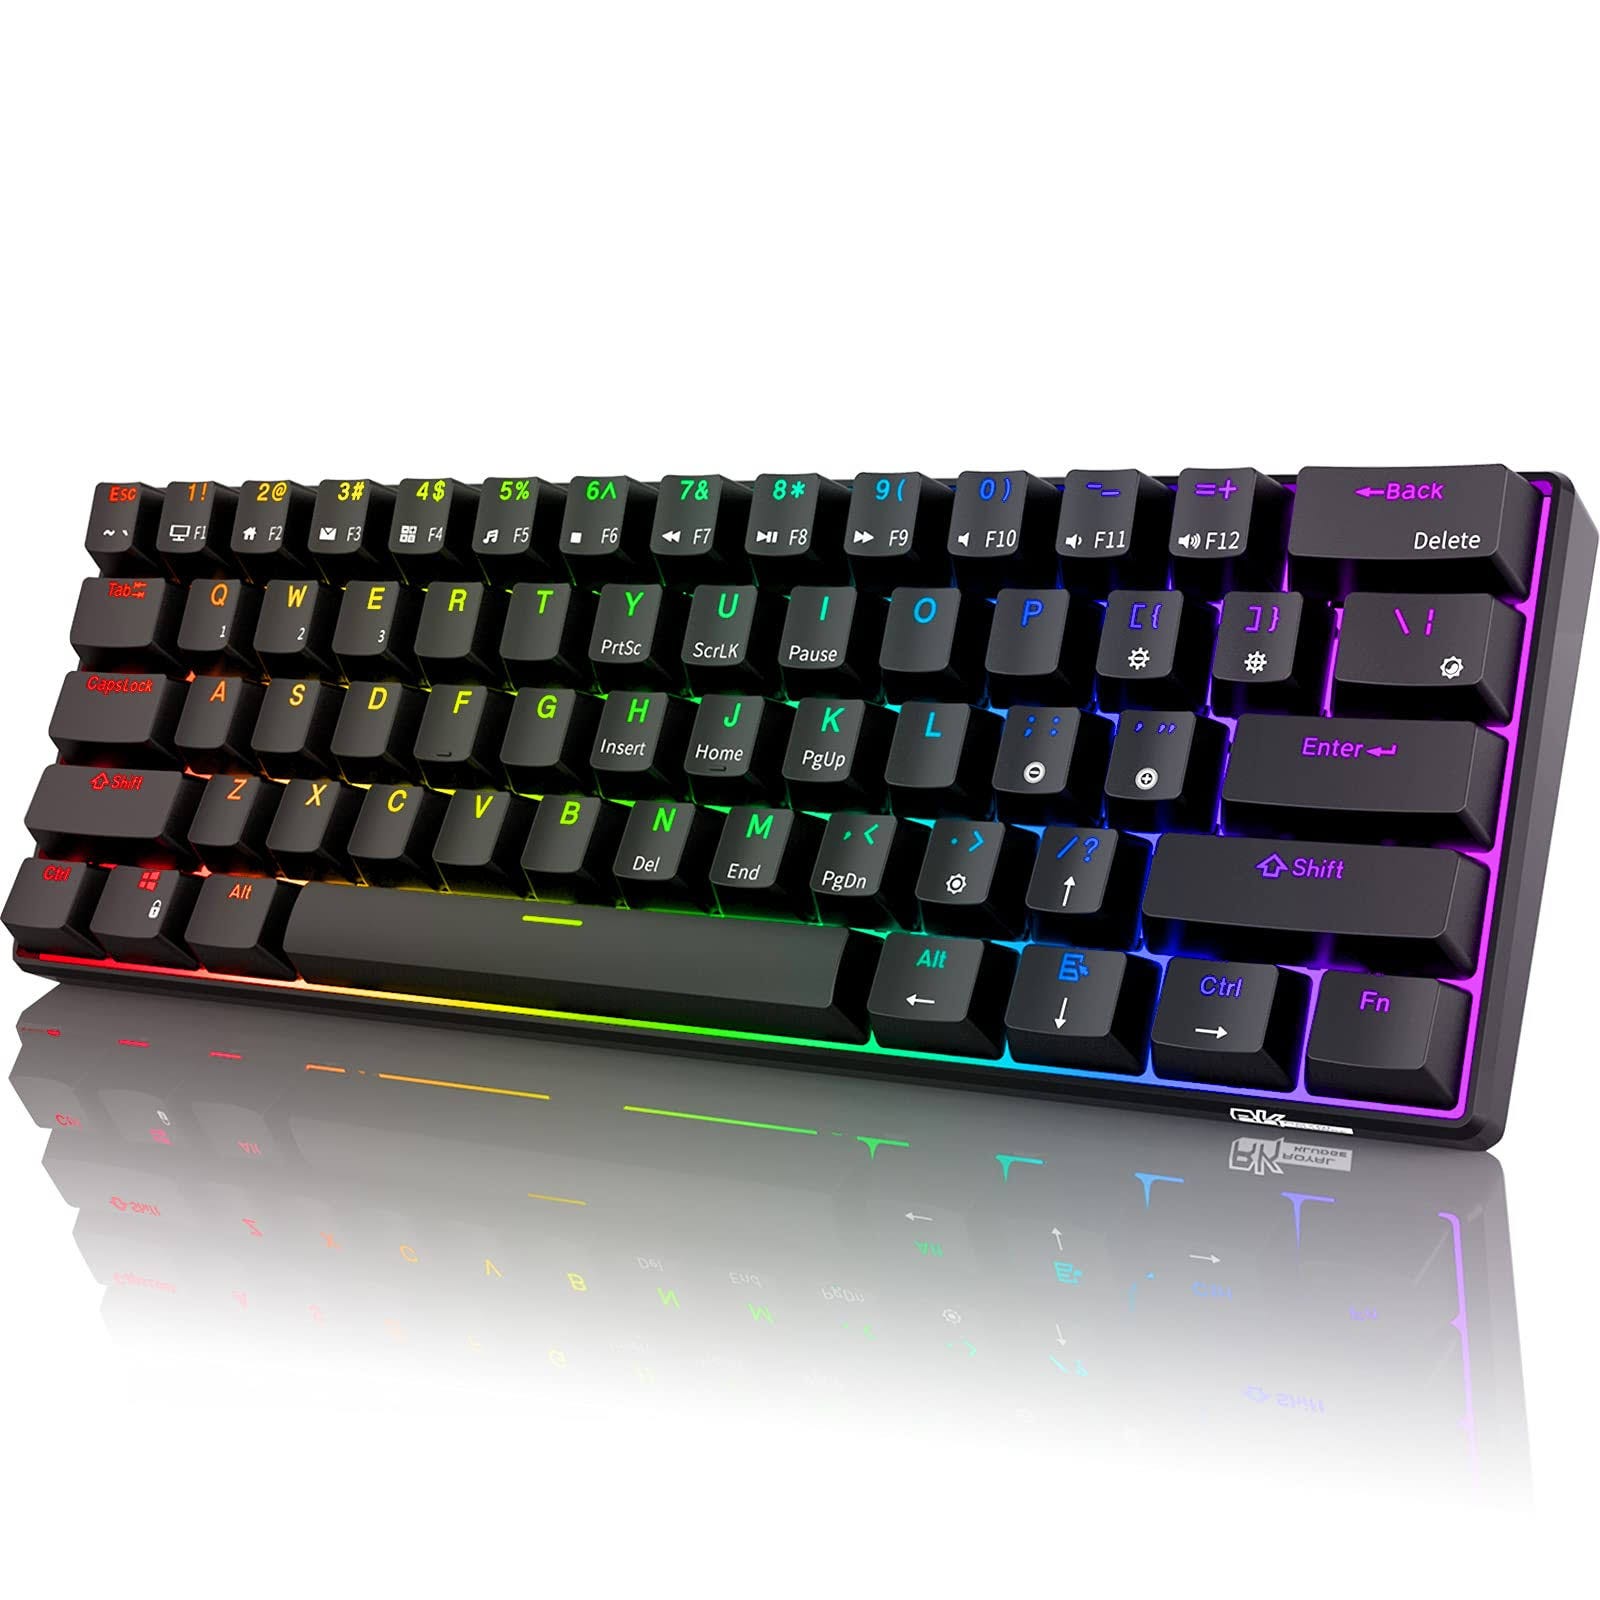 Royal KLUDGE RK61 60% Mechanical Keyboard - 2.4Ghz/Bluetooth/Wired, Wireless Bluetooth, RGB, Coiled Cable | Image